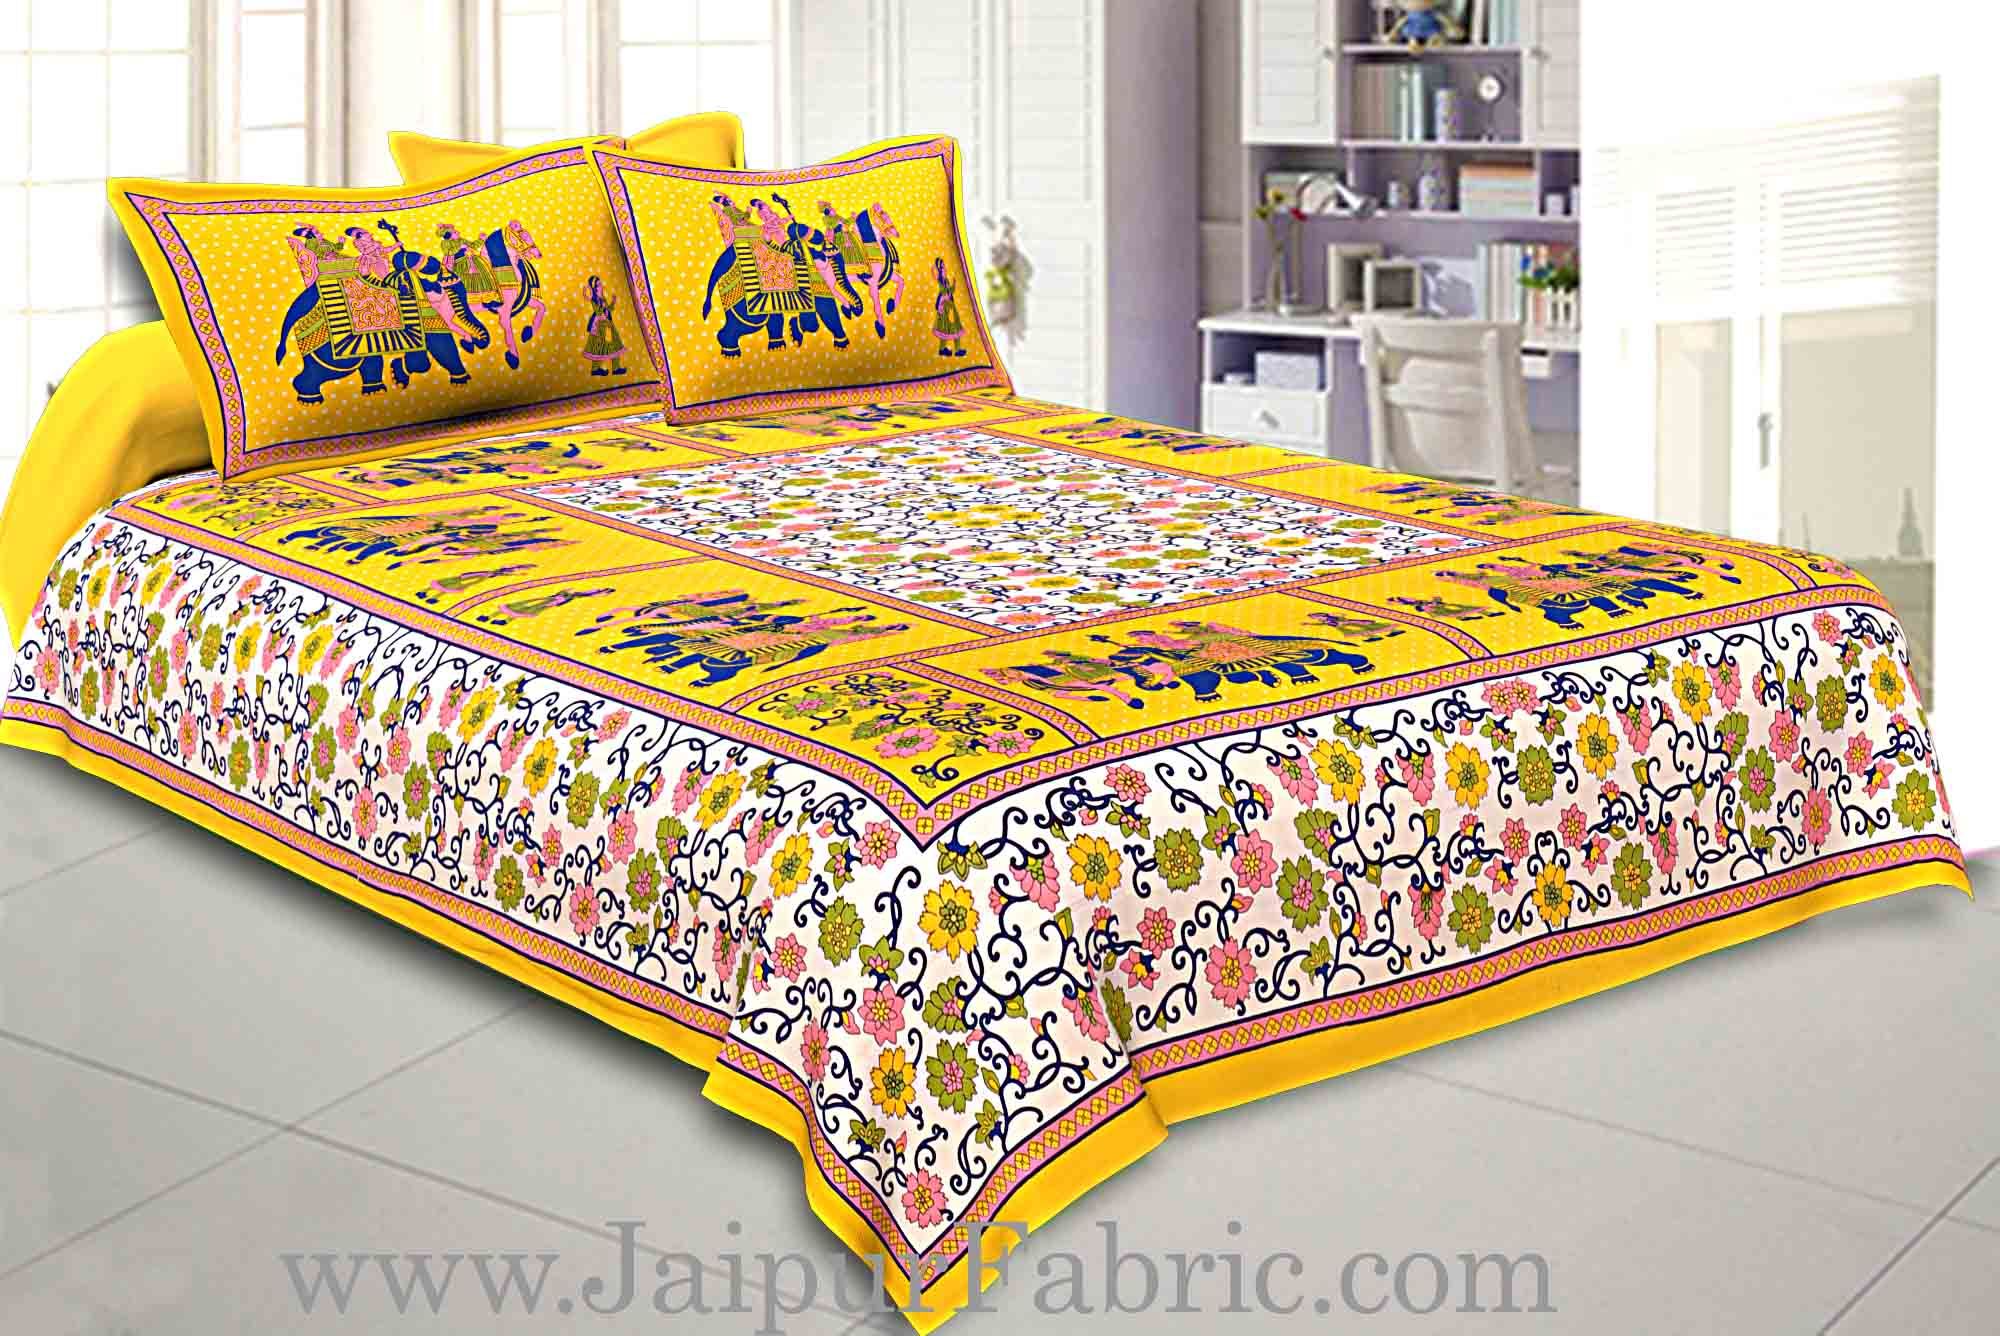 COMBO351 Beautiful Multicolor 2 Bedsheet + 4 Pillow Cover